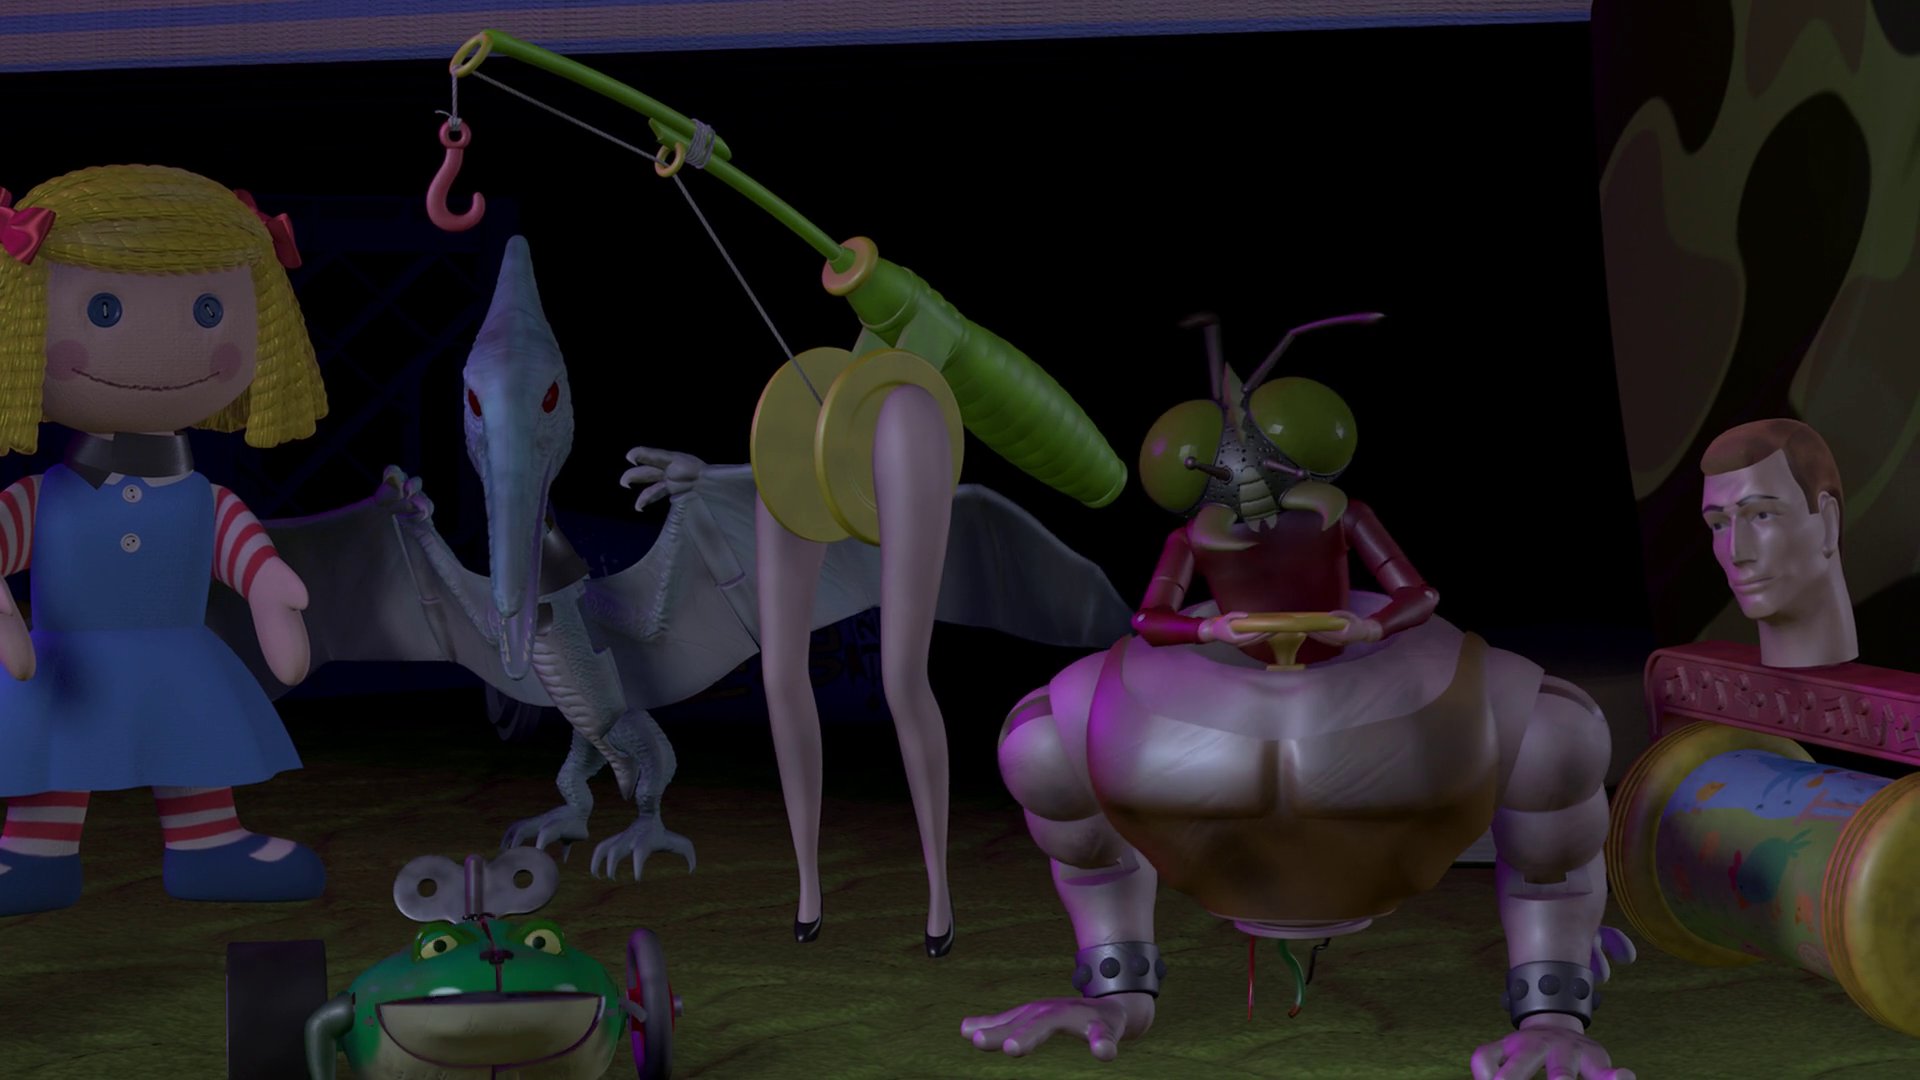 𝕞𝕠𝕧𝕚𝕖𝕡𝕠𝕝𝕝𝕫 on X: Toy Story has a hooker doll. Sid took